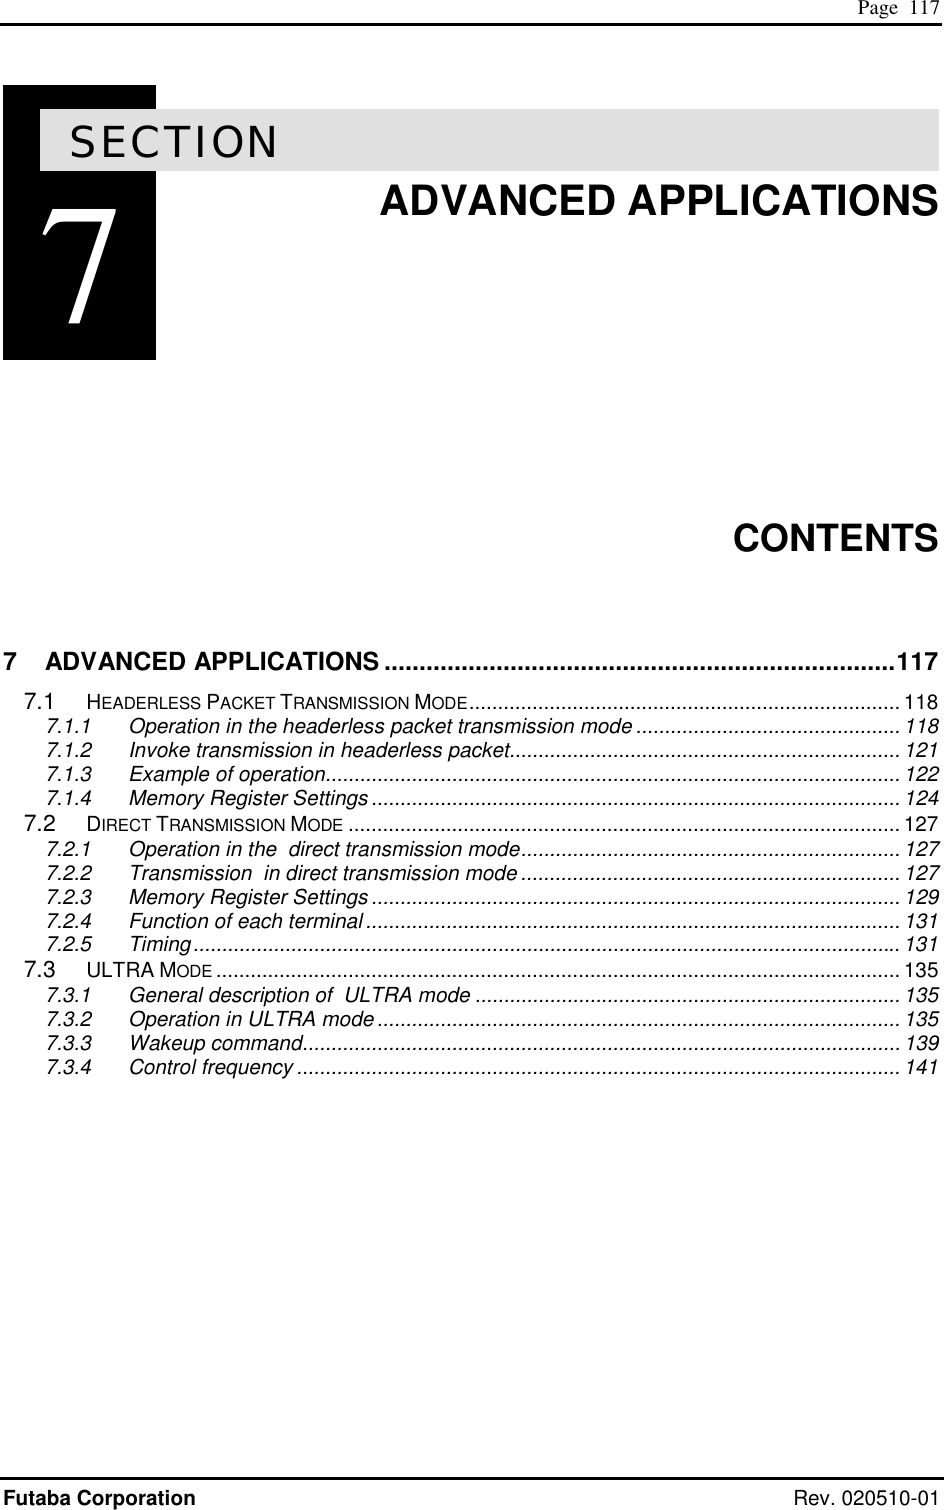  Page  117 Futaba Corporation Rev. 020510-01 7SECTION 7  ADVANCED APPLICATIONS         CONTENTS  7 ADVANCED APPLICATIONS .........................................................................117 7.1 HEADERLESS PACKET TRANSMISSION MODE........................................................................... 118 7.1.1 Operation in the headerless packet transmission mode ..............................................118 7.1.2 Invoke transmission in headerless packet.................................................................... 121 7.1.3 Example of operation.................................................................................................... 122 7.1.4 Memory Register Settings ............................................................................................ 124 7.2 DIRECT TRANSMISSION MODE ................................................................................................ 127 7.2.1 Operation in the  direct transmission mode.................................................................. 127 7.2.2 Transmission  in direct transmission mode ..................................................................127 7.2.3 Memory Register Settings ............................................................................................ 129 7.2.4 Function of each terminal ............................................................................................. 131 7.2.5 Timing........................................................................................................................... 131 7.3 ULTRA MODE ....................................................................................................................... 135 7.3.1 General description of  ULTRA mode ..........................................................................135 7.3.2 Operation in ULTRA mode ........................................................................................... 135 7.3.3 Wakeup command........................................................................................................ 139 7.3.4 Control frequency ......................................................................................................... 141   